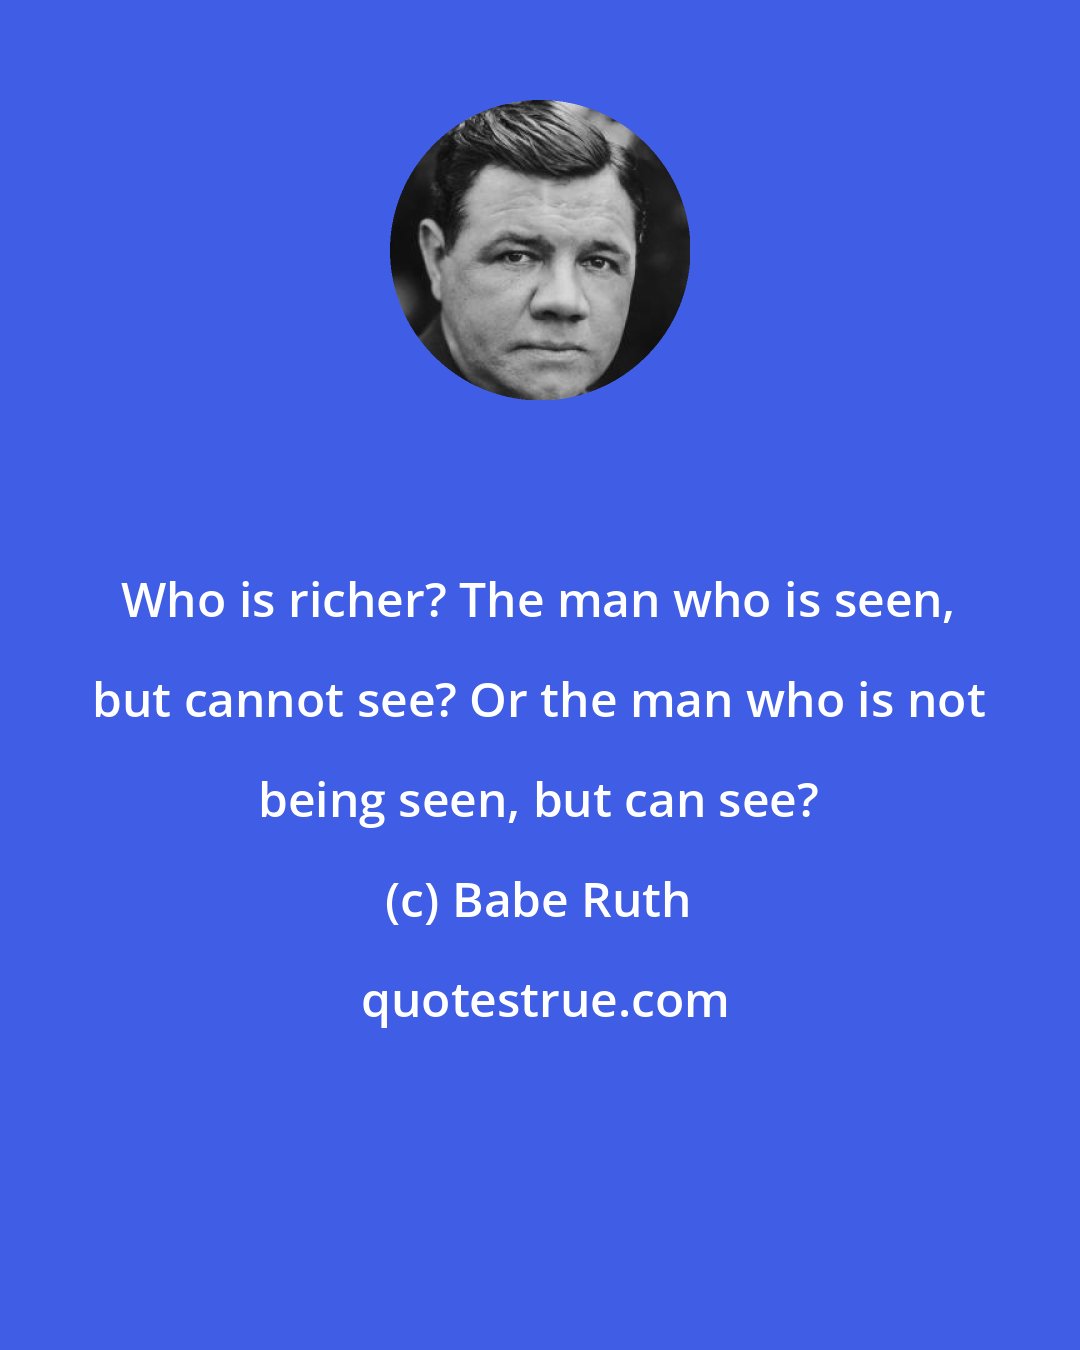 Babe Ruth: Who is richer? The man who is seen, but cannot see? Or the man who is not being seen, but can see?